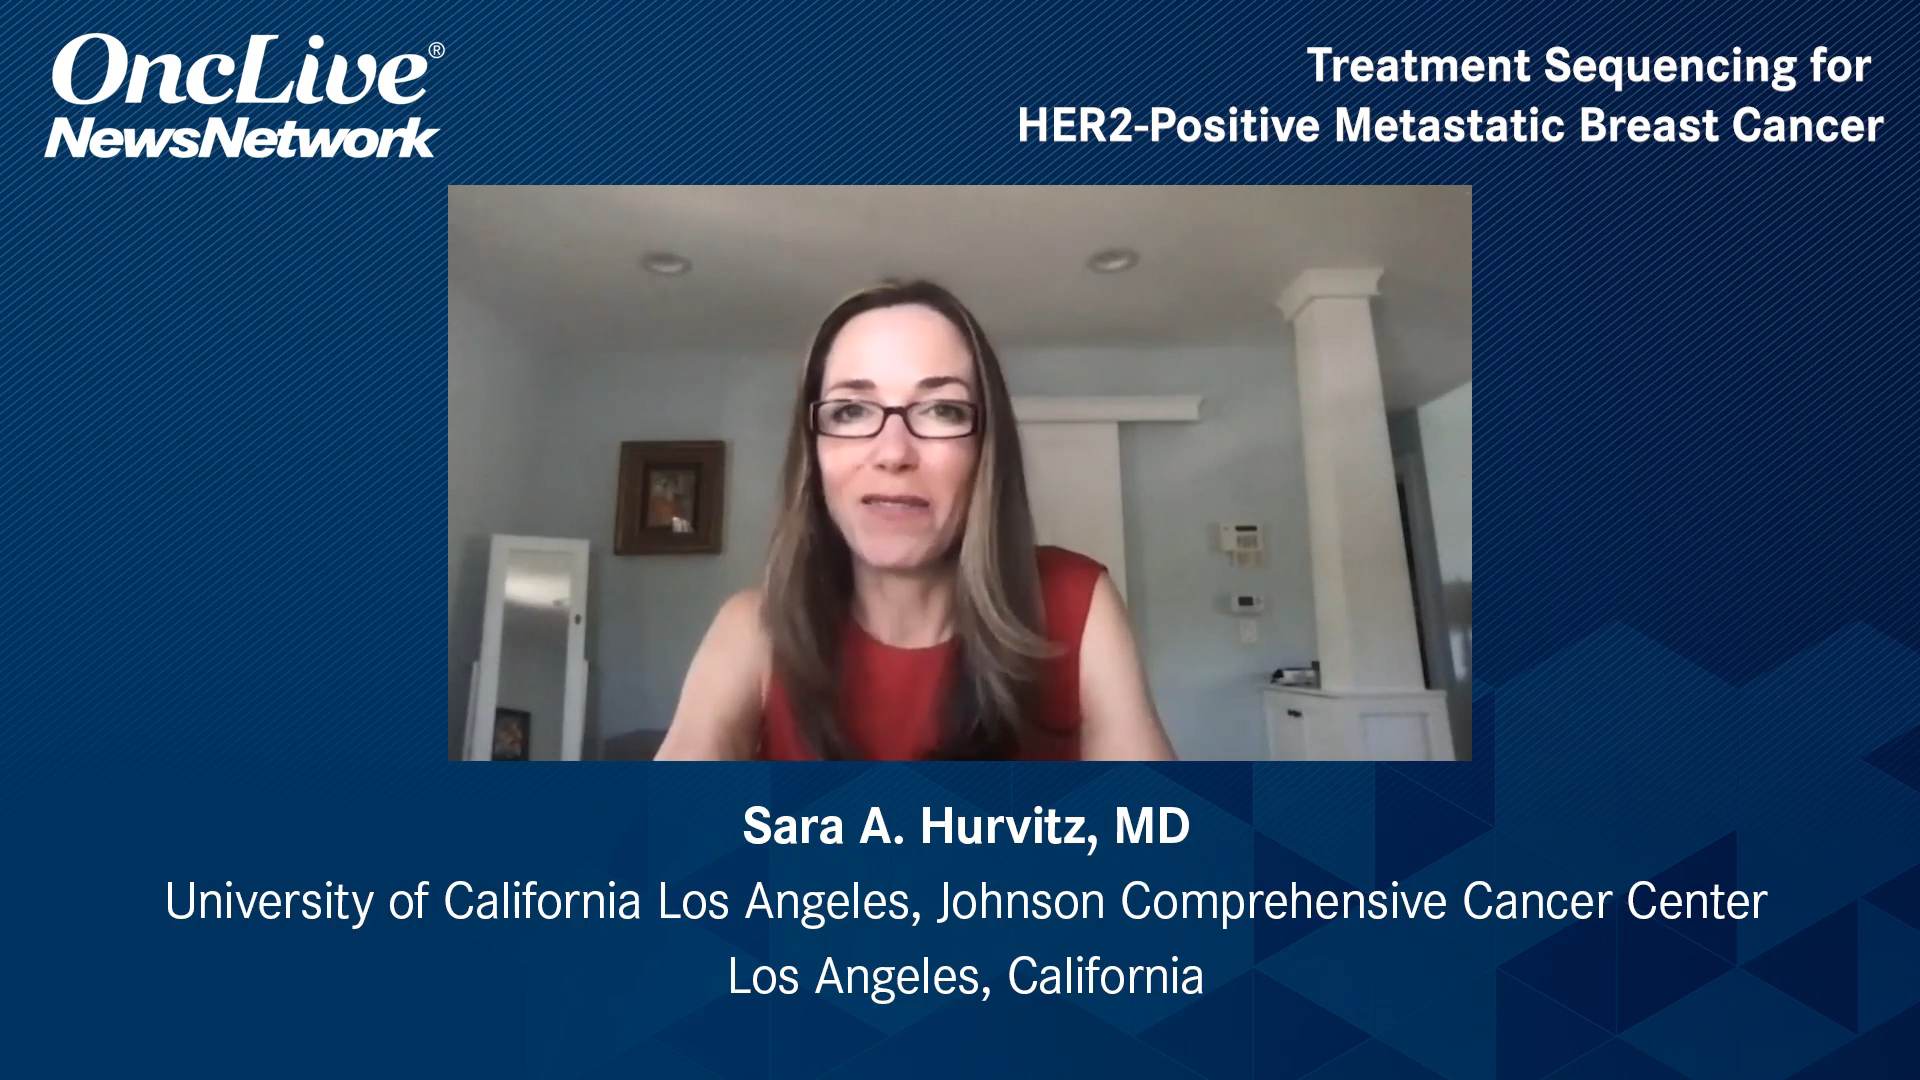 Treatment Sequencing for HER2-Positive Metastatic Breast Cancer